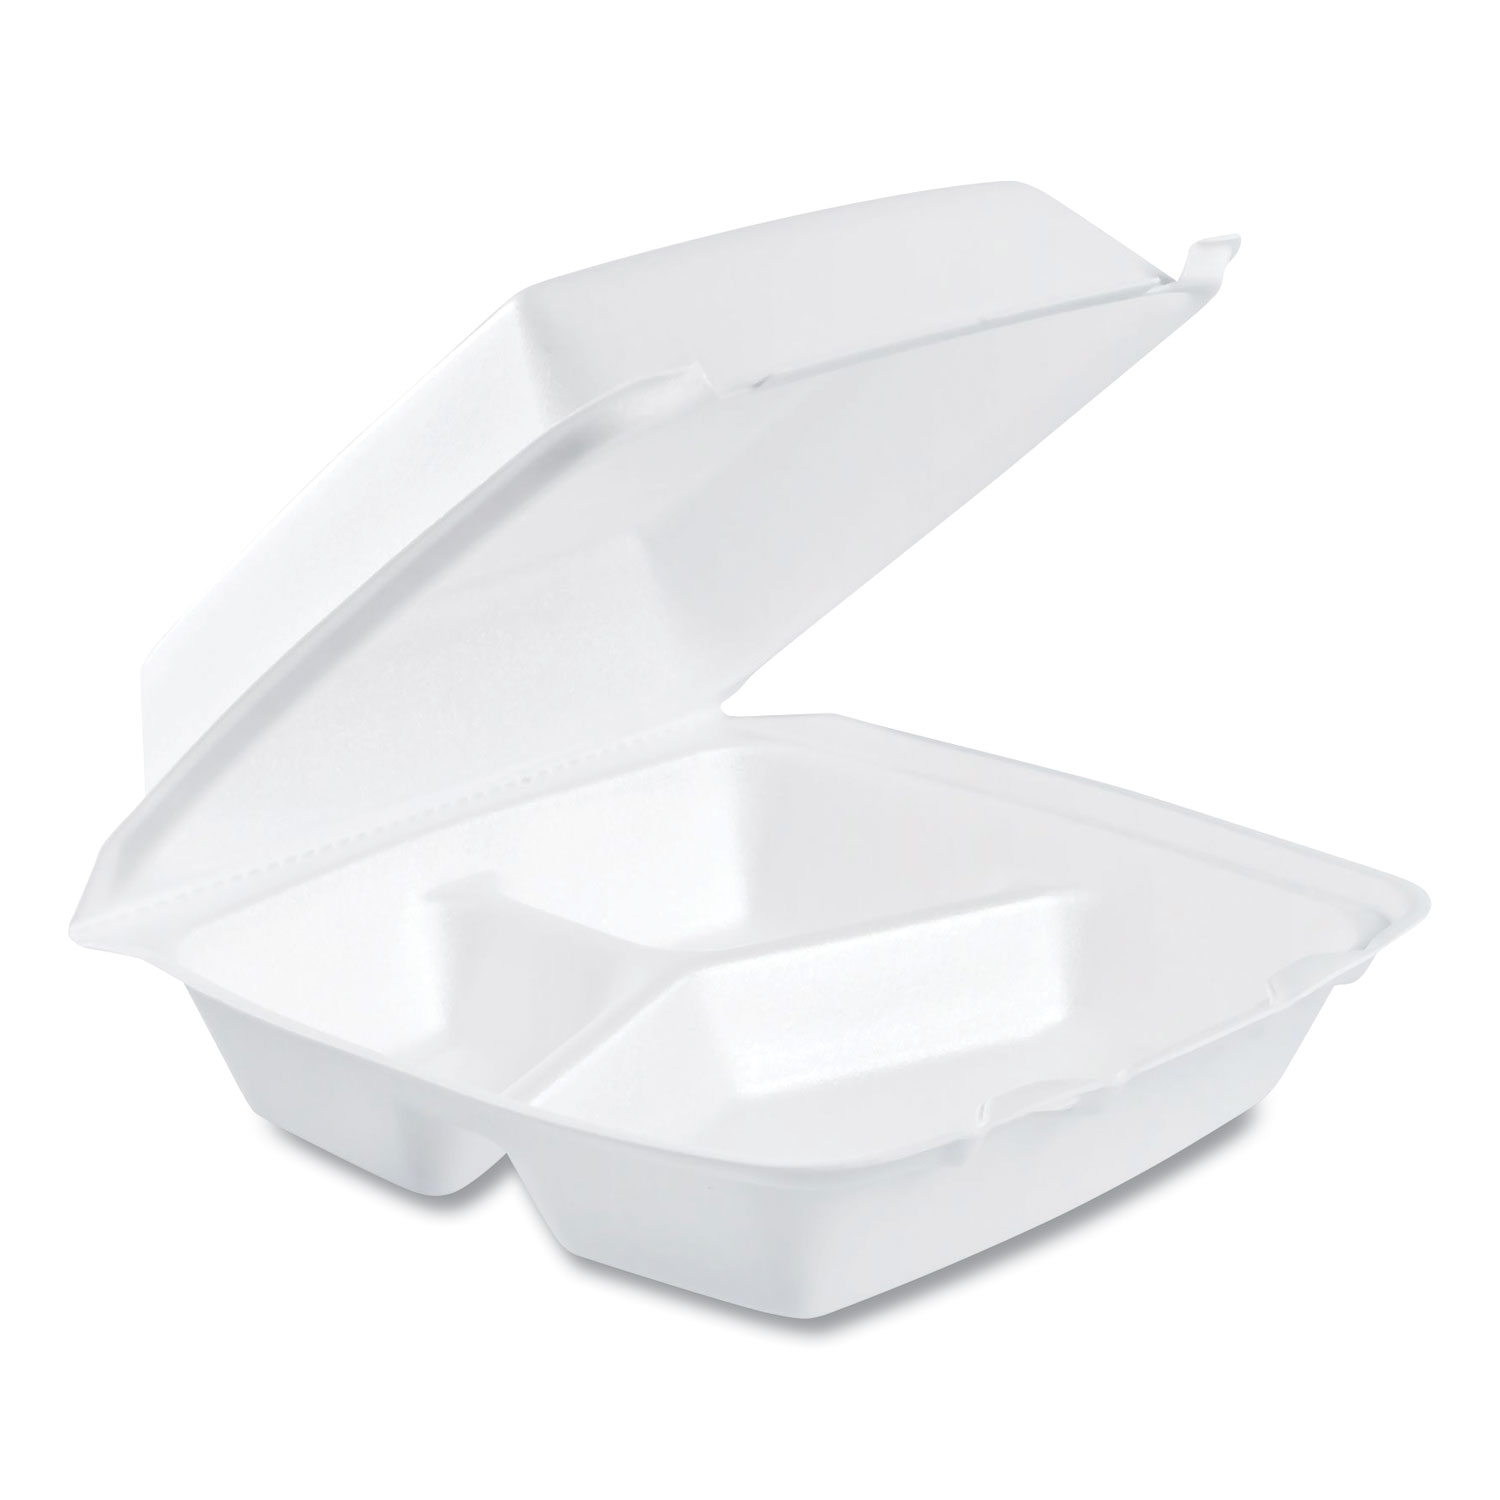  Dart 85HT3R Foam Container, Hinged Lid, 3-Comp, 8 3/8 x 7 7/8 x 3 1/4, 200/Carton (DCC85HT3R) 